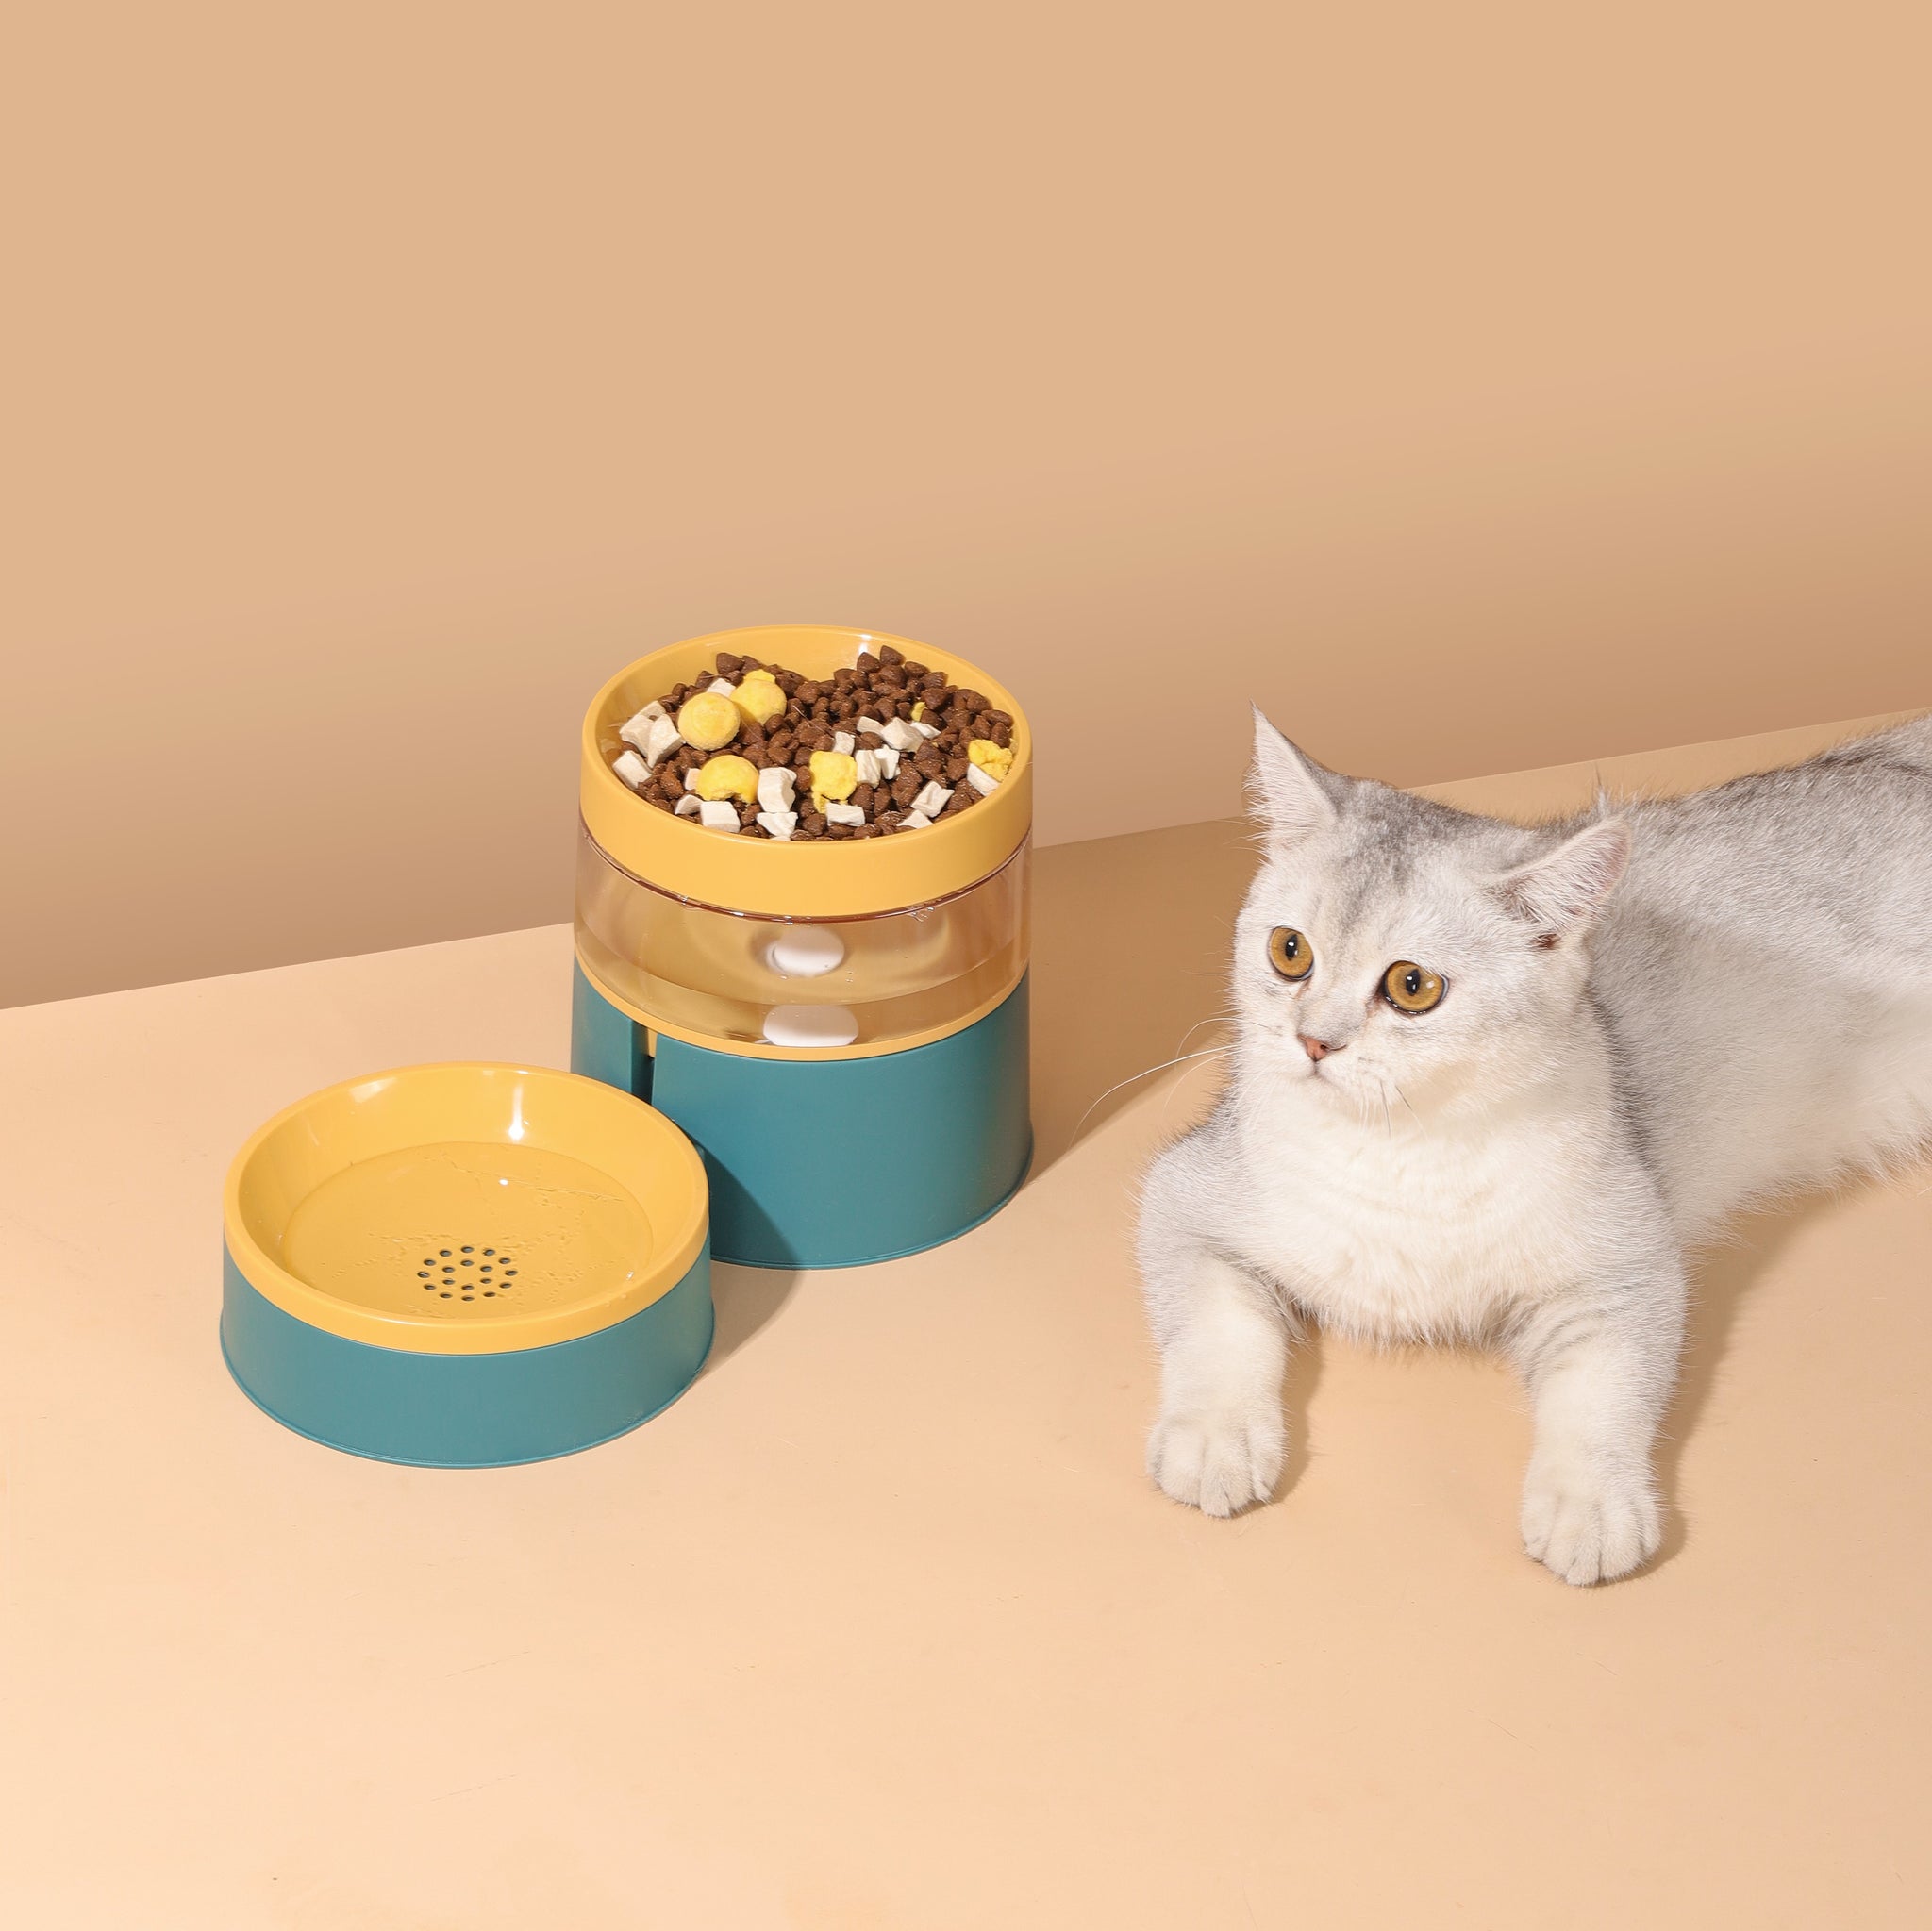 Double Cat Bowls - 2 in 1 Automatic Pet Feeder,Detachable Gravity Water Dispenser and Food Bowl Set for Cats/ Puppies,Upgrade Design Anti Vomiting Raised Cat Bowls-Green